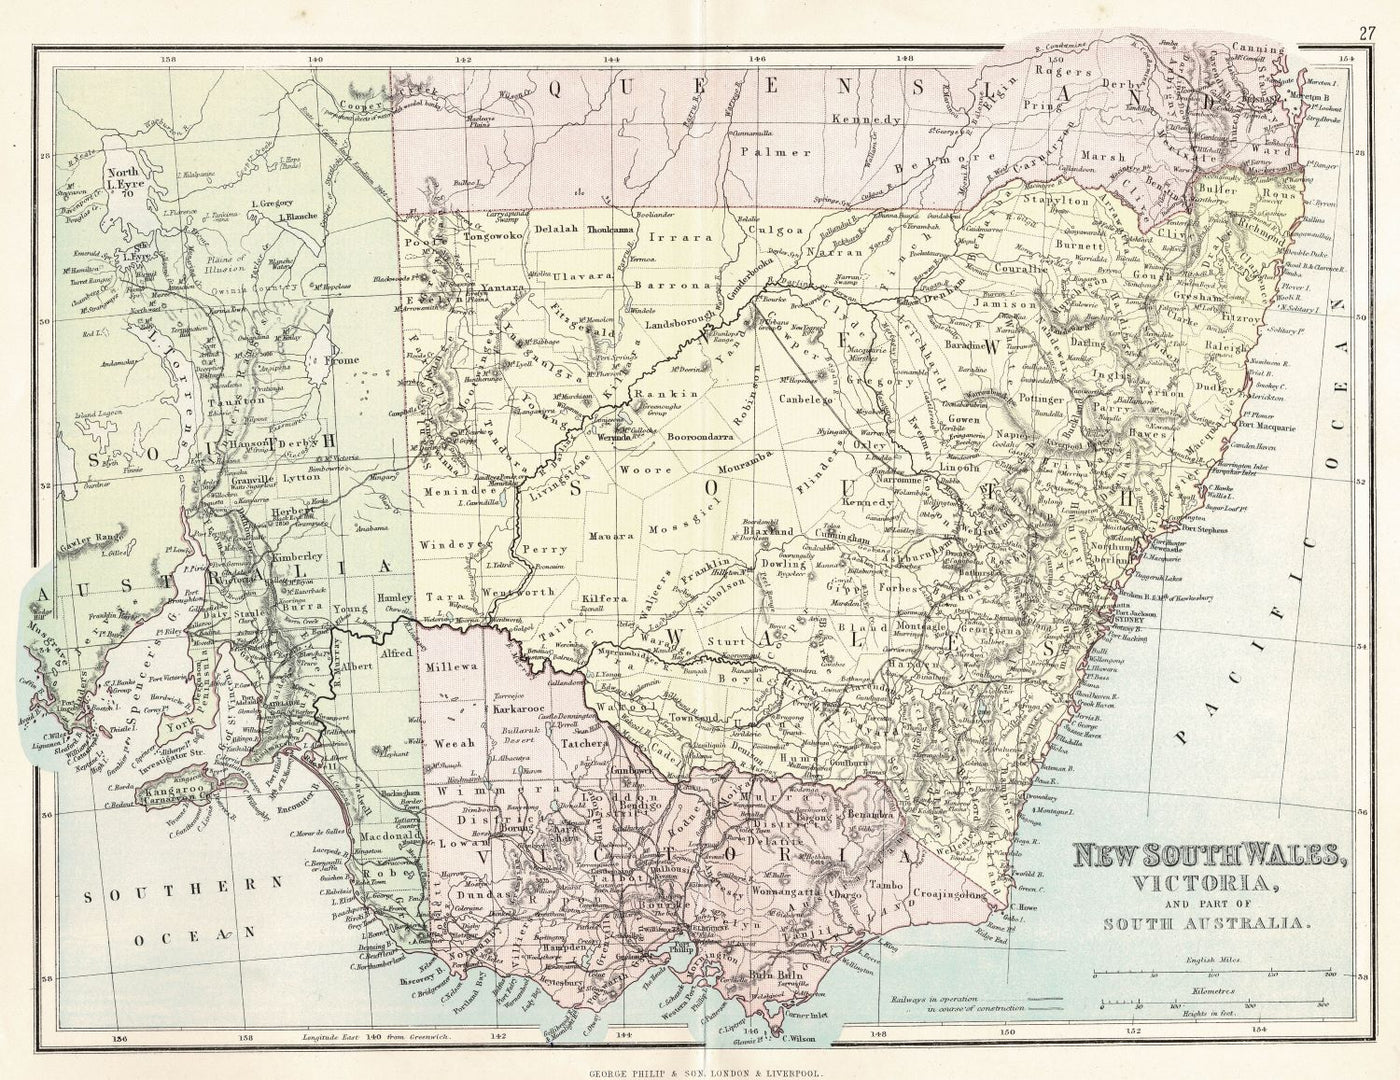 New South Wales and Victoria Australia antique map 1891